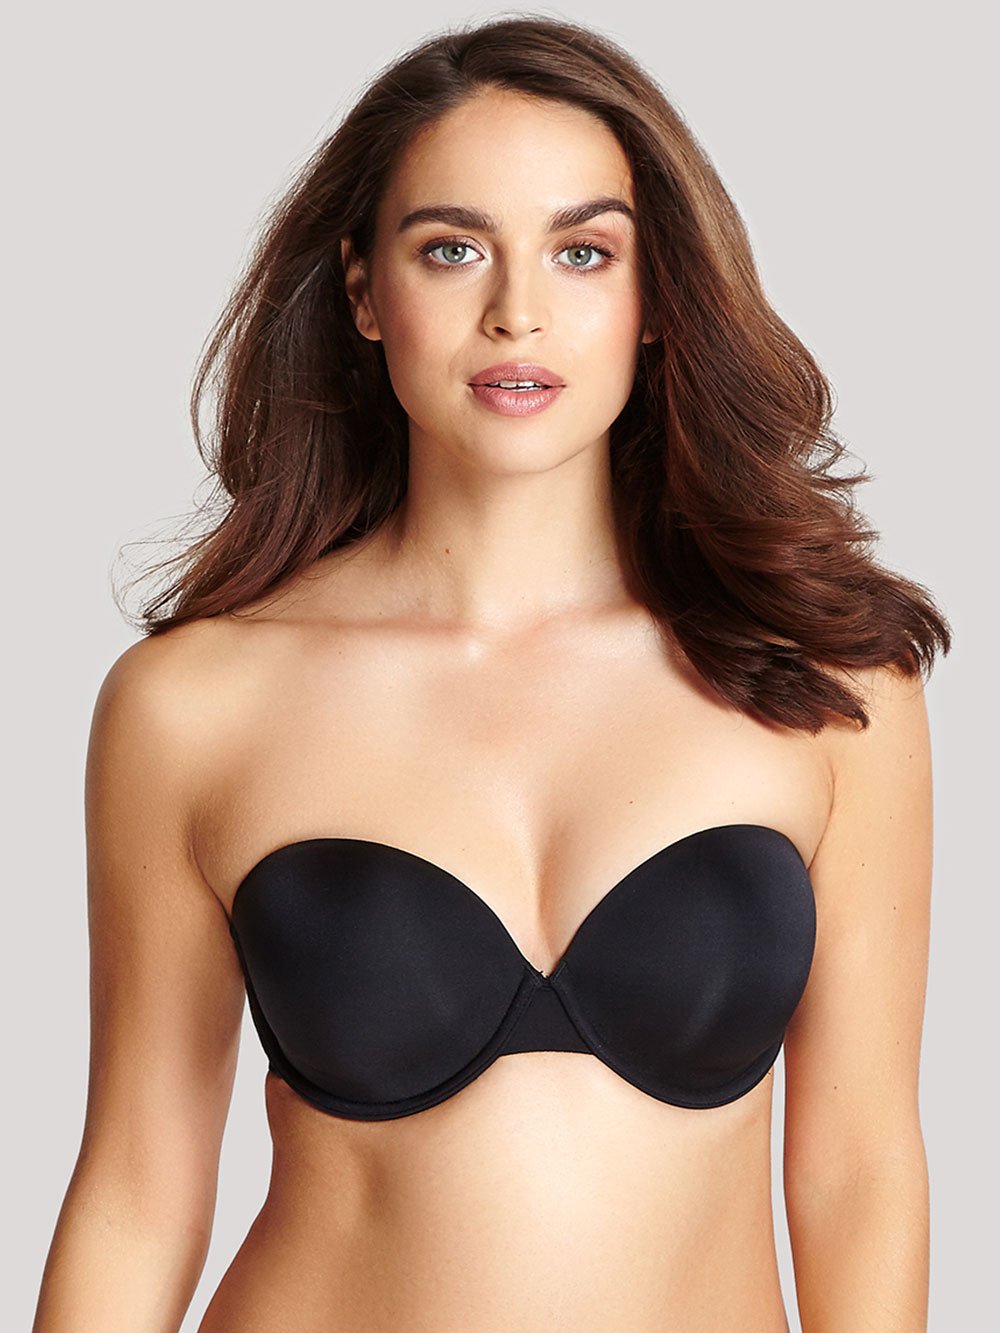 32E Bras: Bras for 32E Boobs and Breast Size 标签语法 - HauteFlair